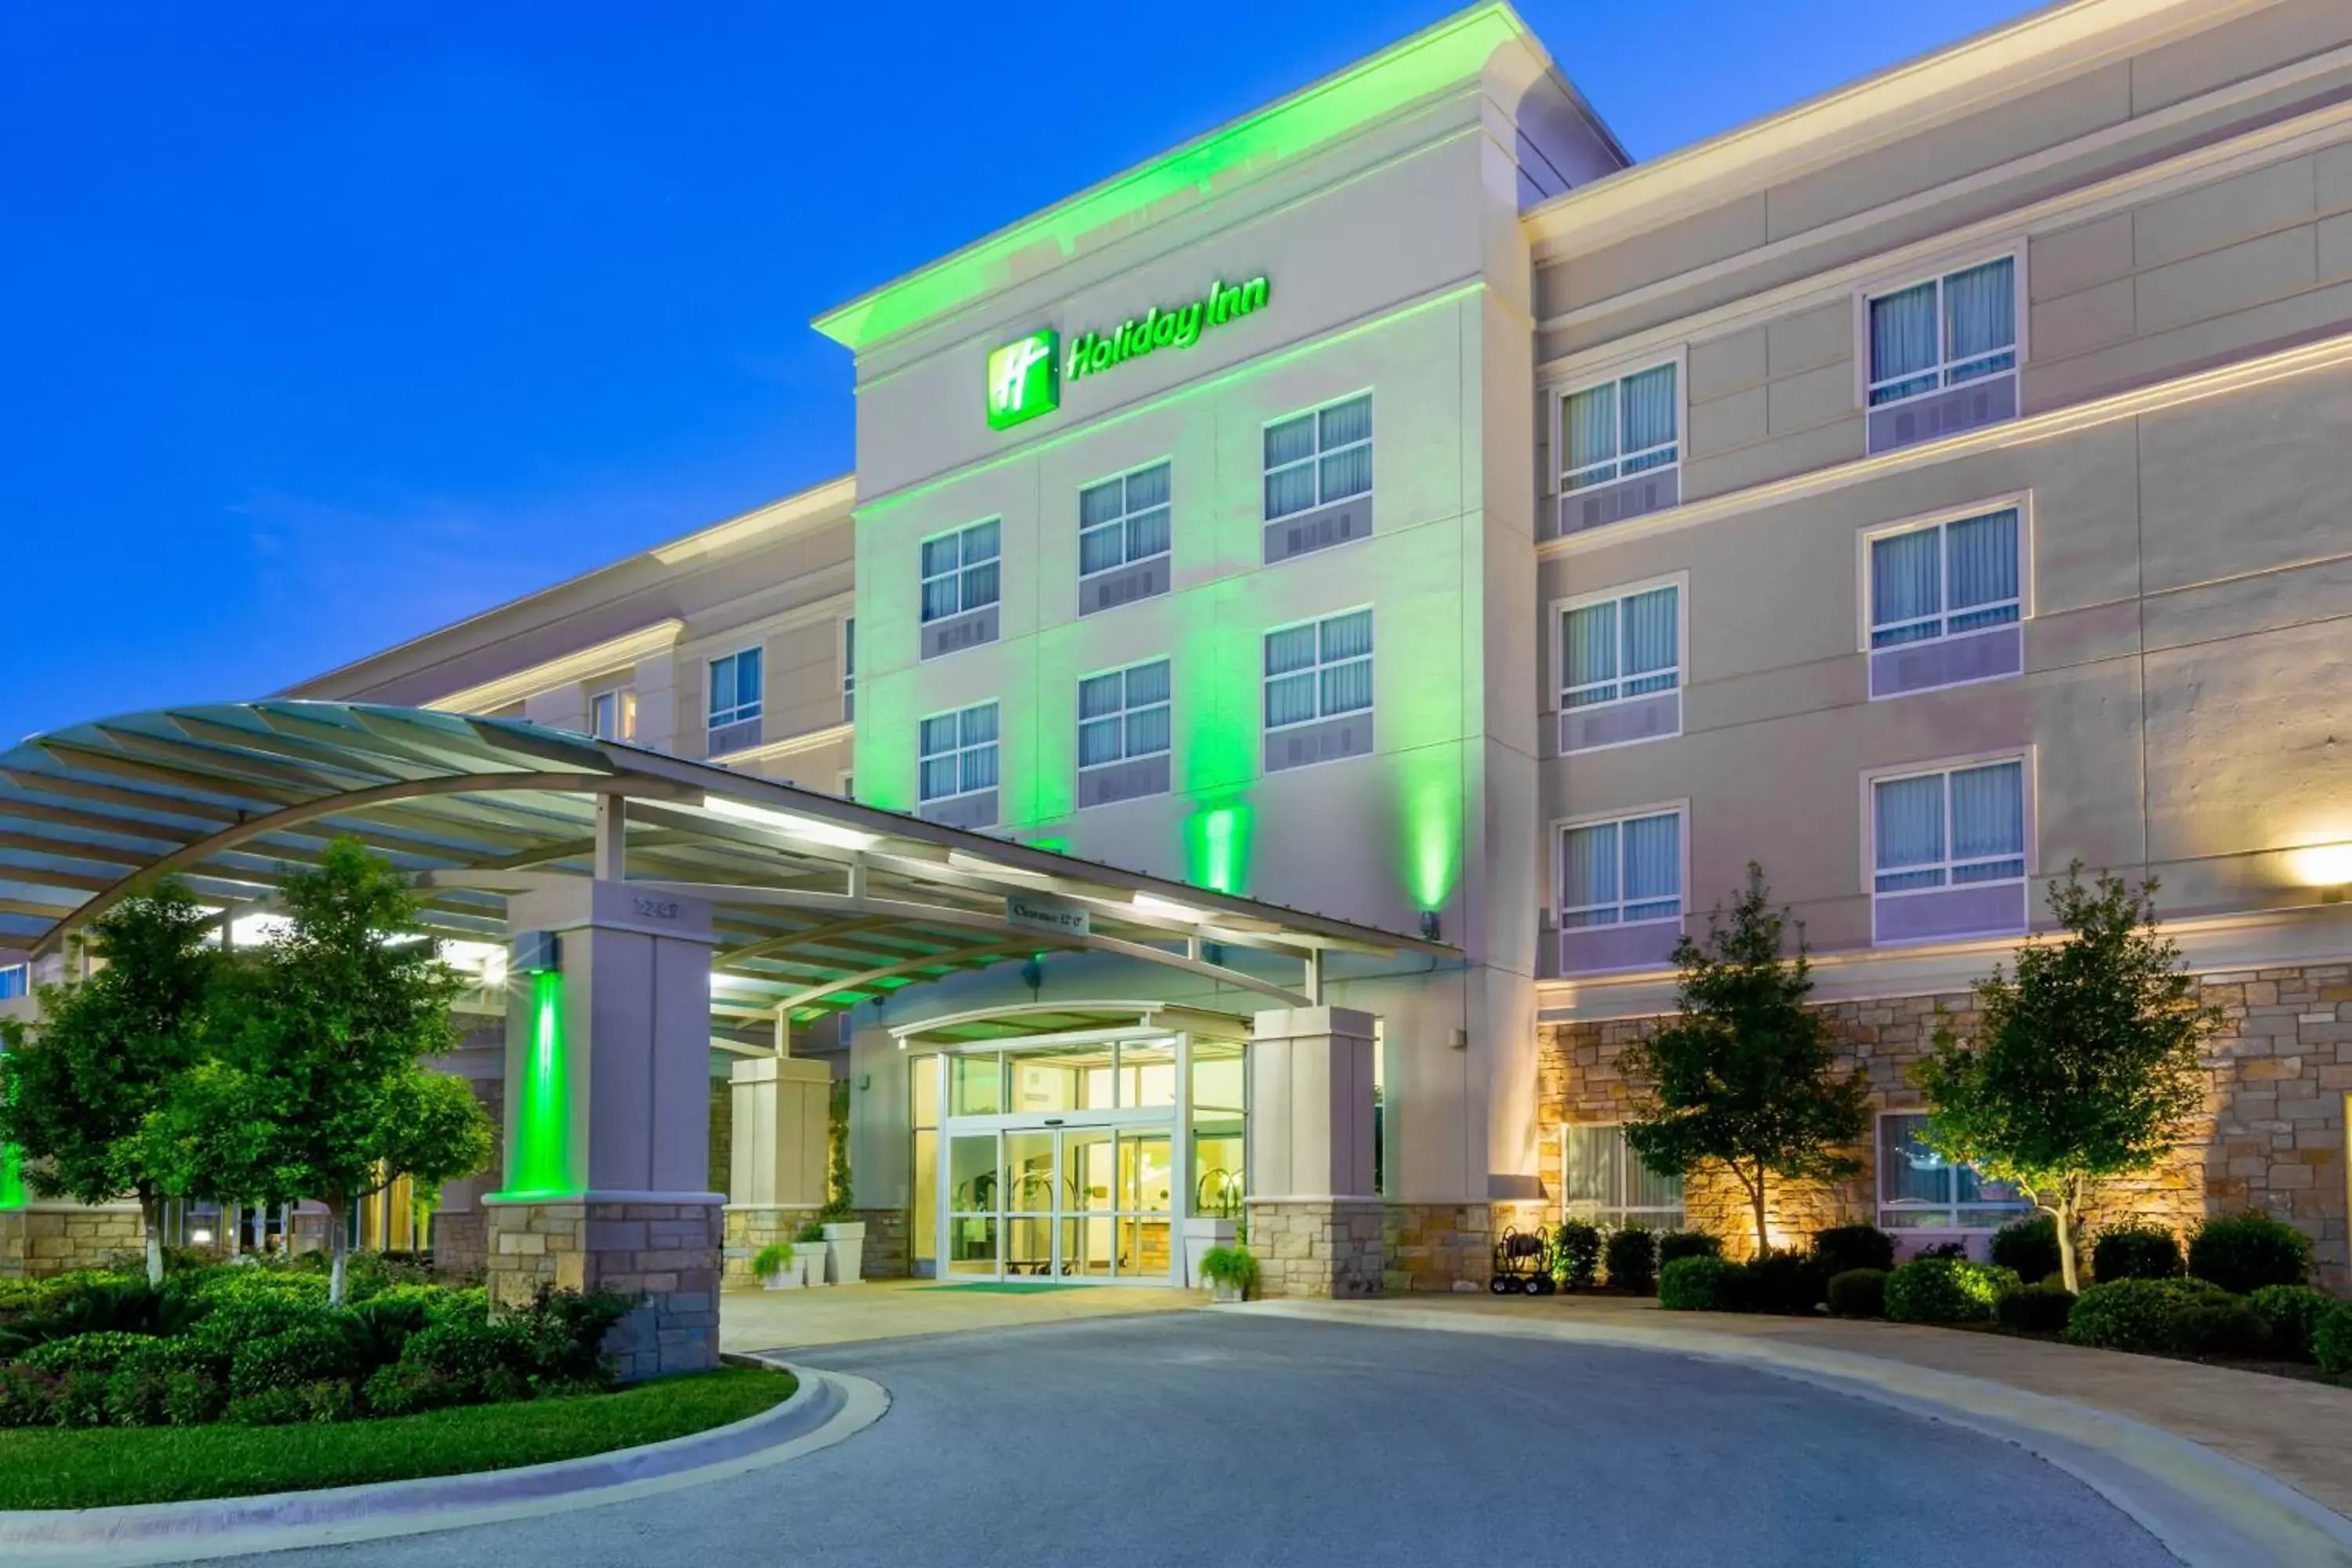 Property Building in Holiday Inn Temple - Belton, an IHG Hotel